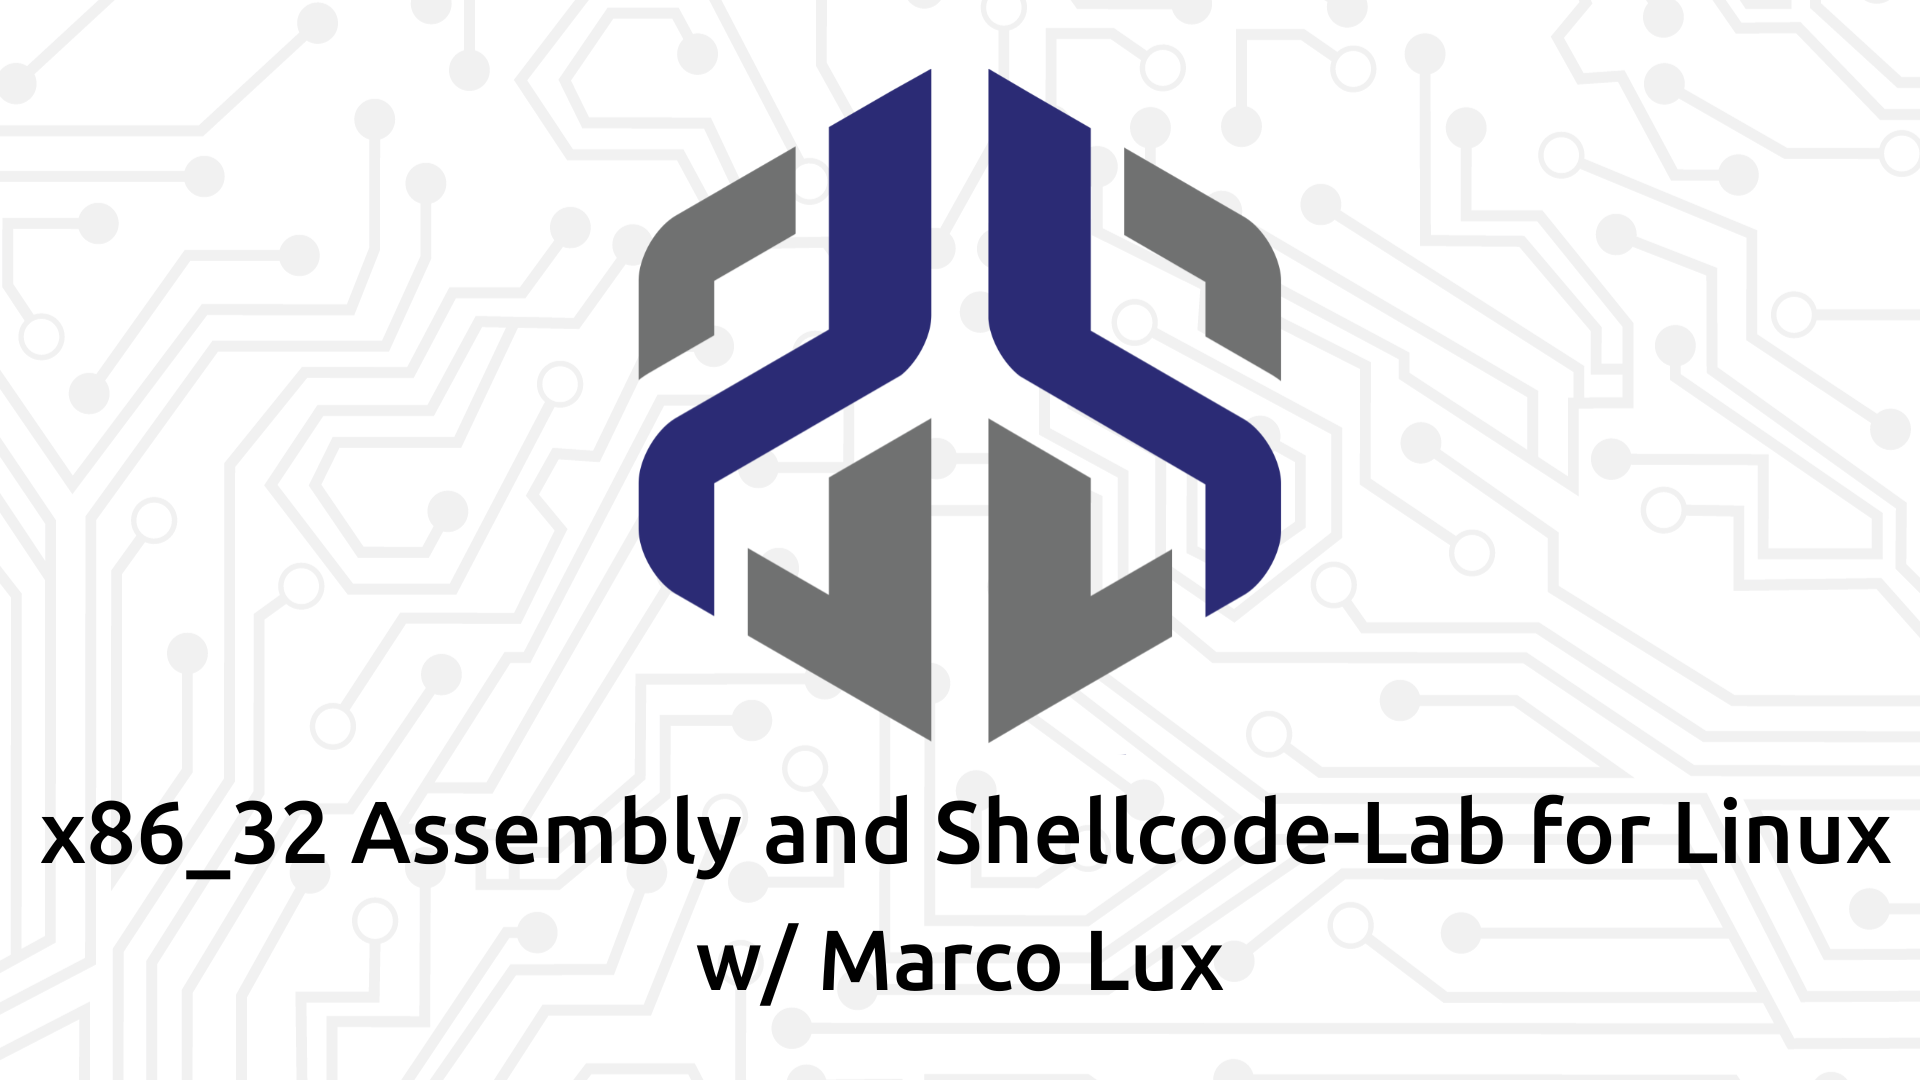 x86_32 Assembly and Shellcode-Lab for Linux